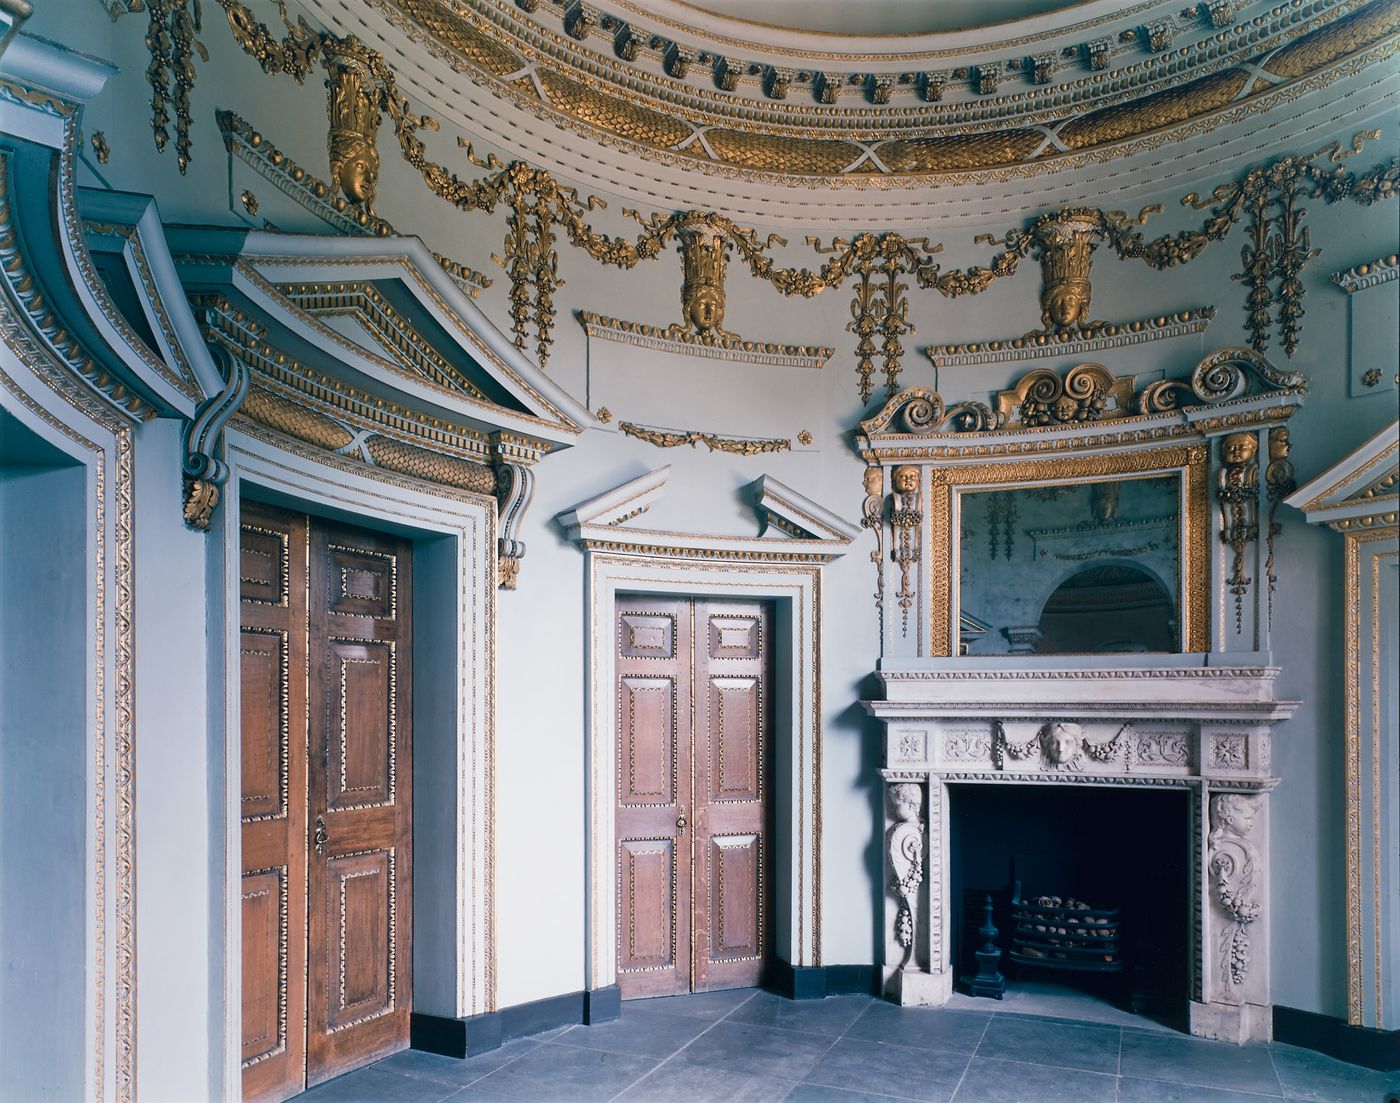 View of the Round Room of the Gallery, Chiswick House, Hounslow, London, England